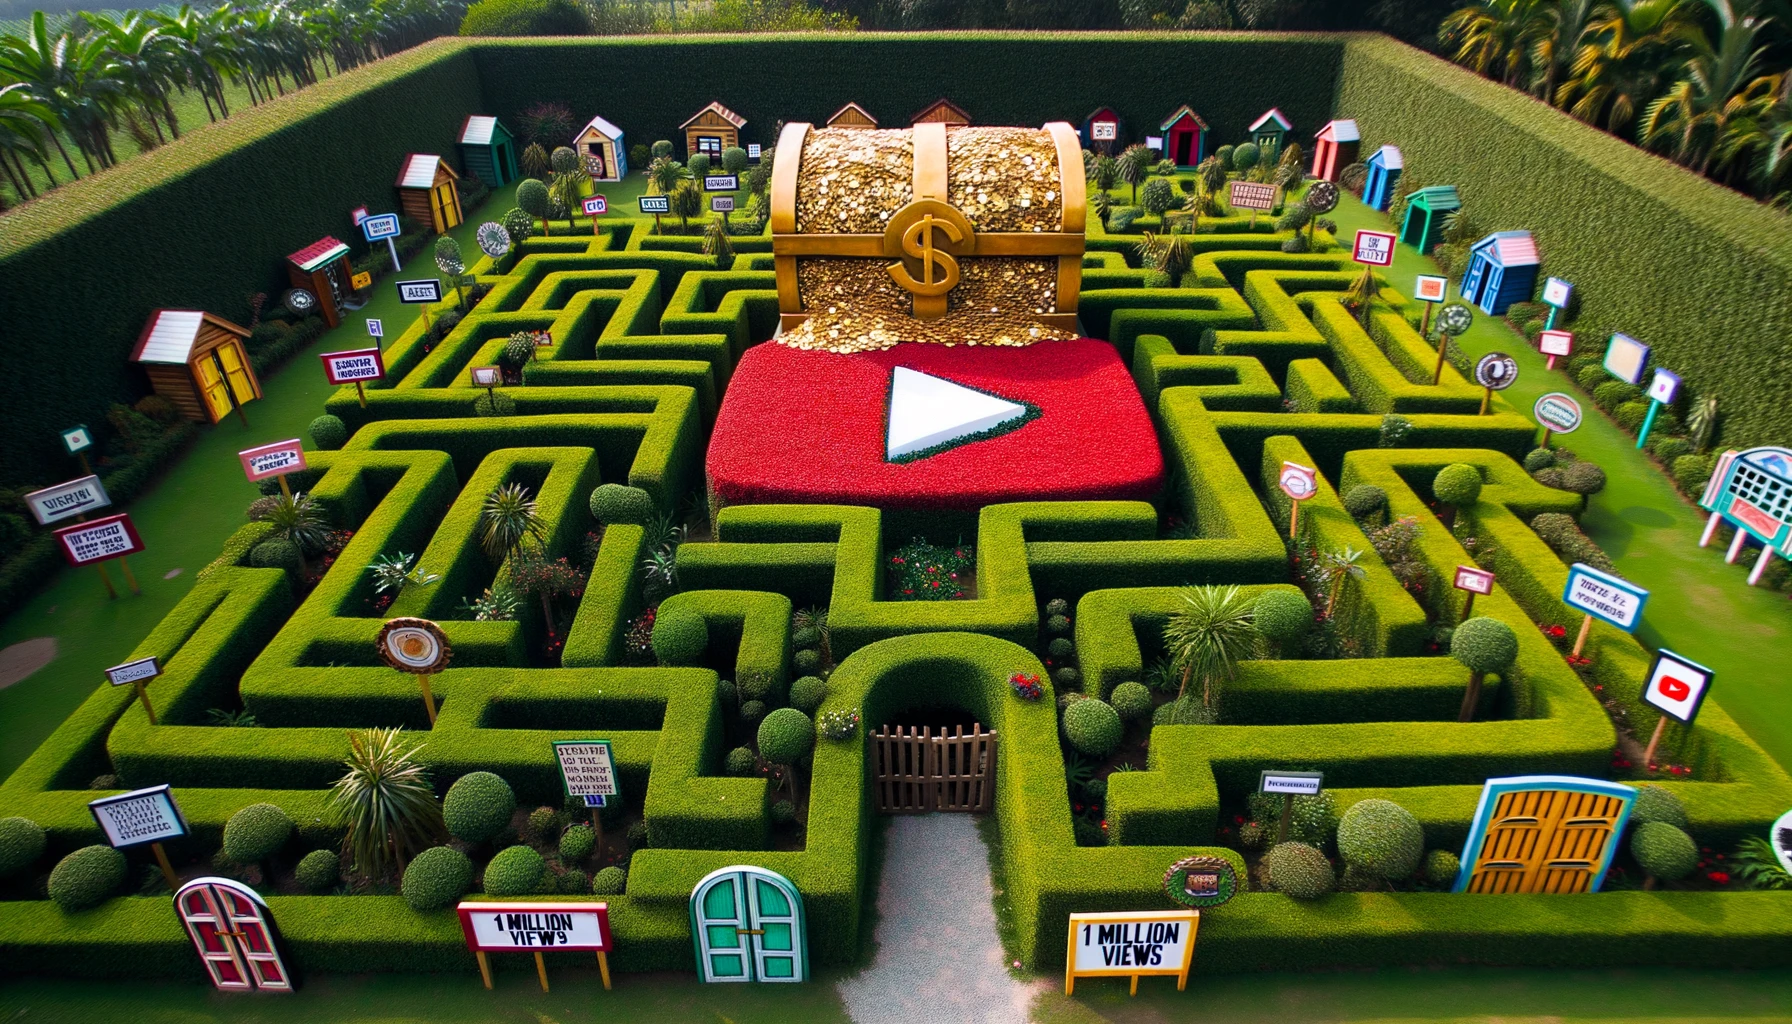 A maze with a Youtube logo with gold demonstrating how much you can earn with Youtube views